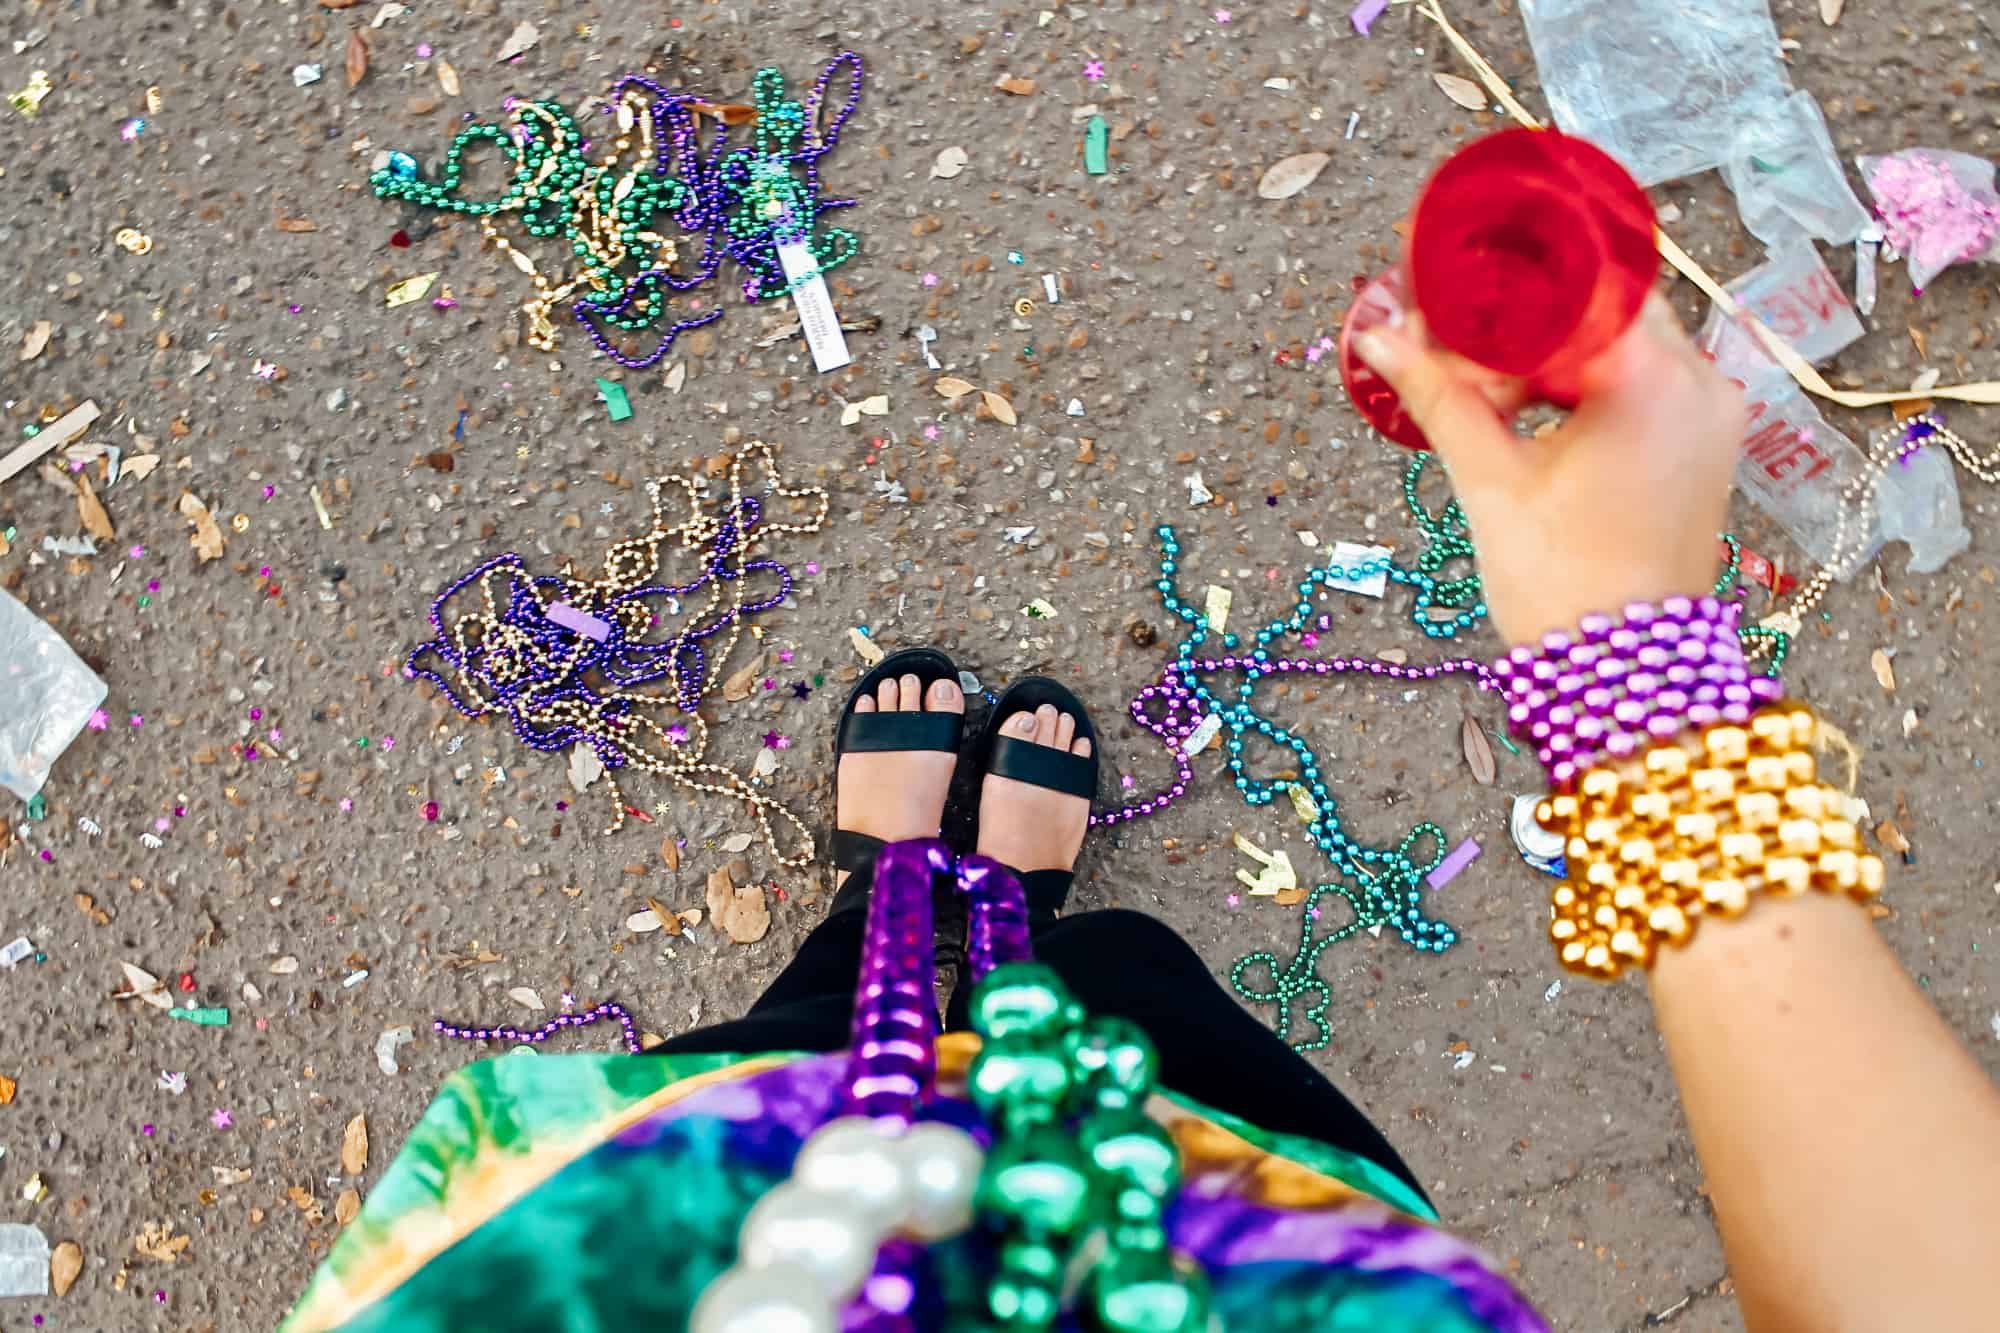 Beads and throws after the parade | What to Expect at Mardi Gras